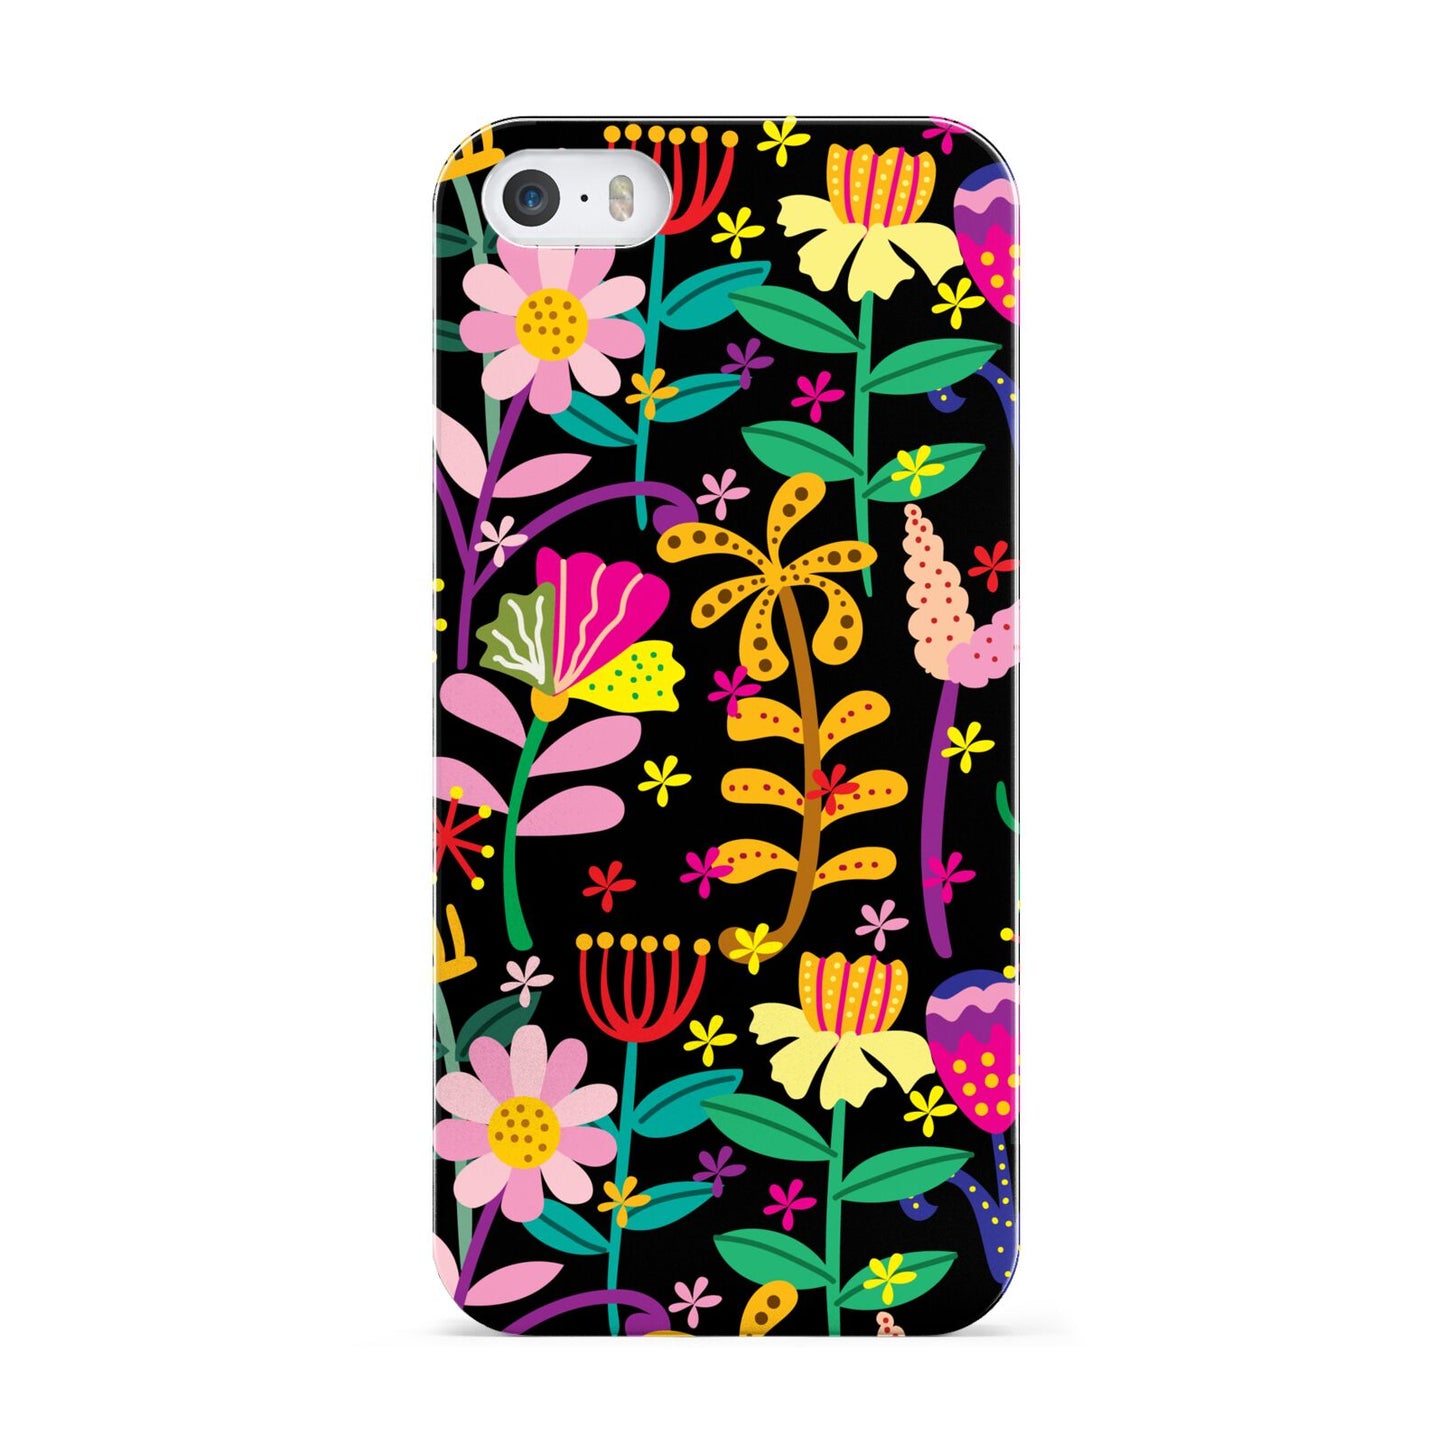 Colourful Flowery Apple iPhone 5 Case